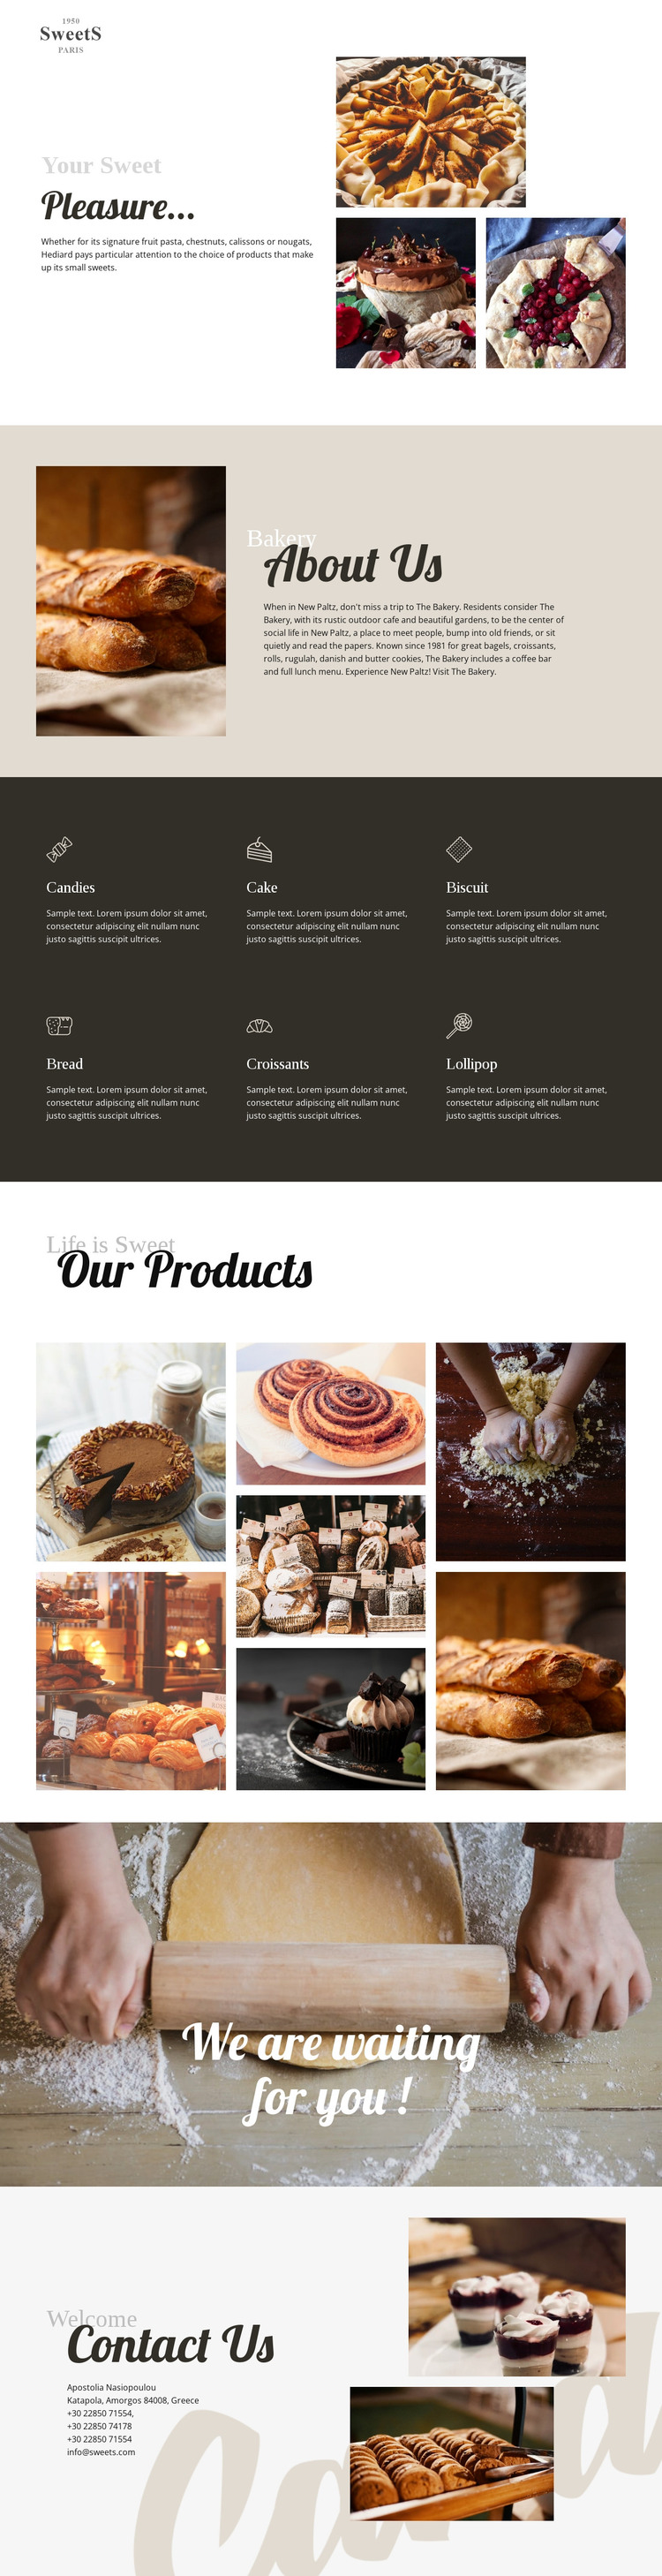 Cakes and baking food Web Design